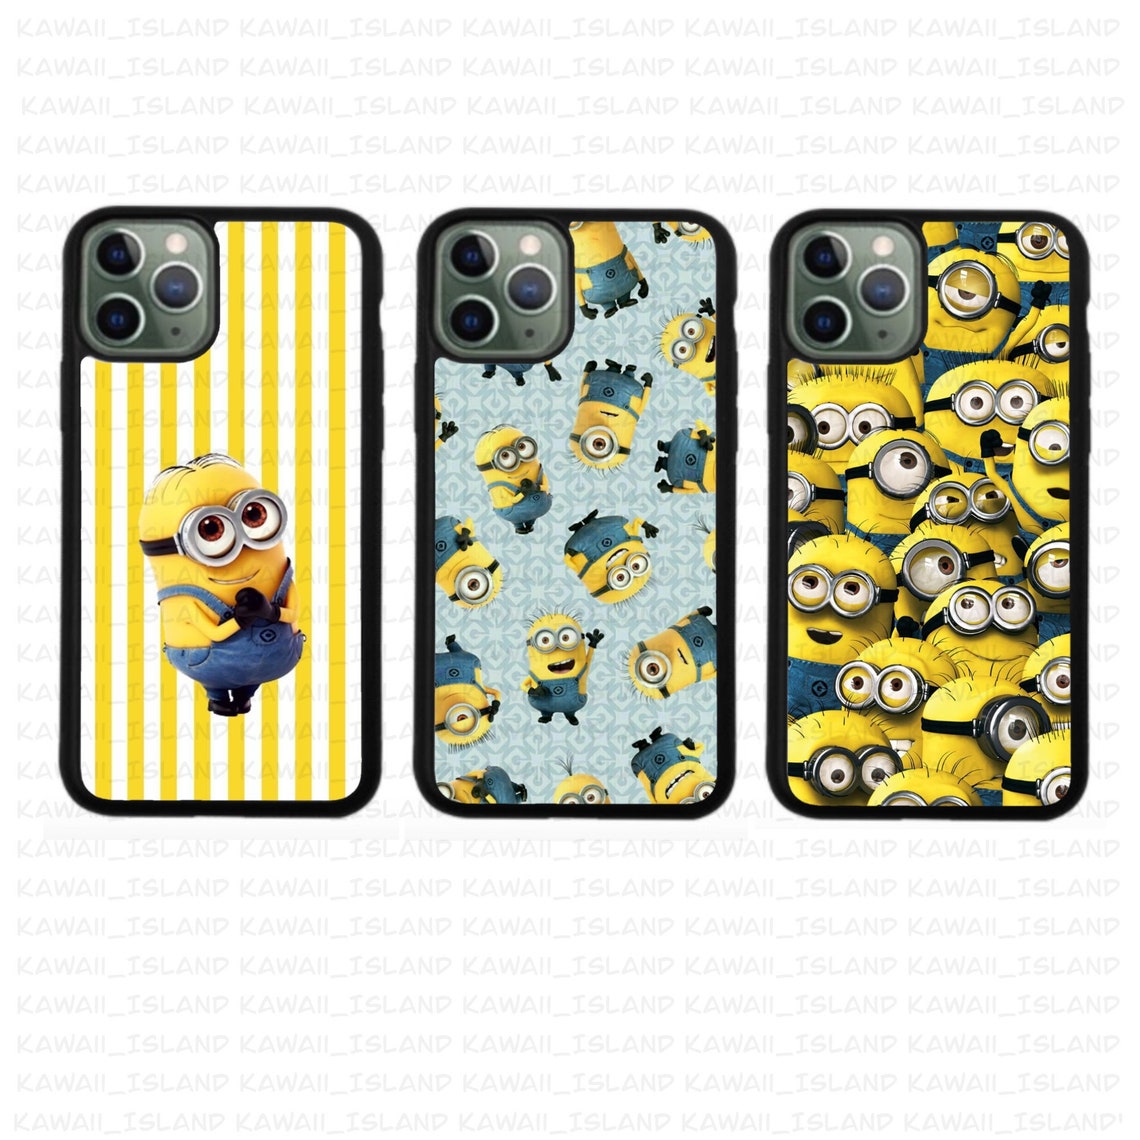 Minion Phone Cases. Despicable Me Phone Cases. iPhone & | Etsy